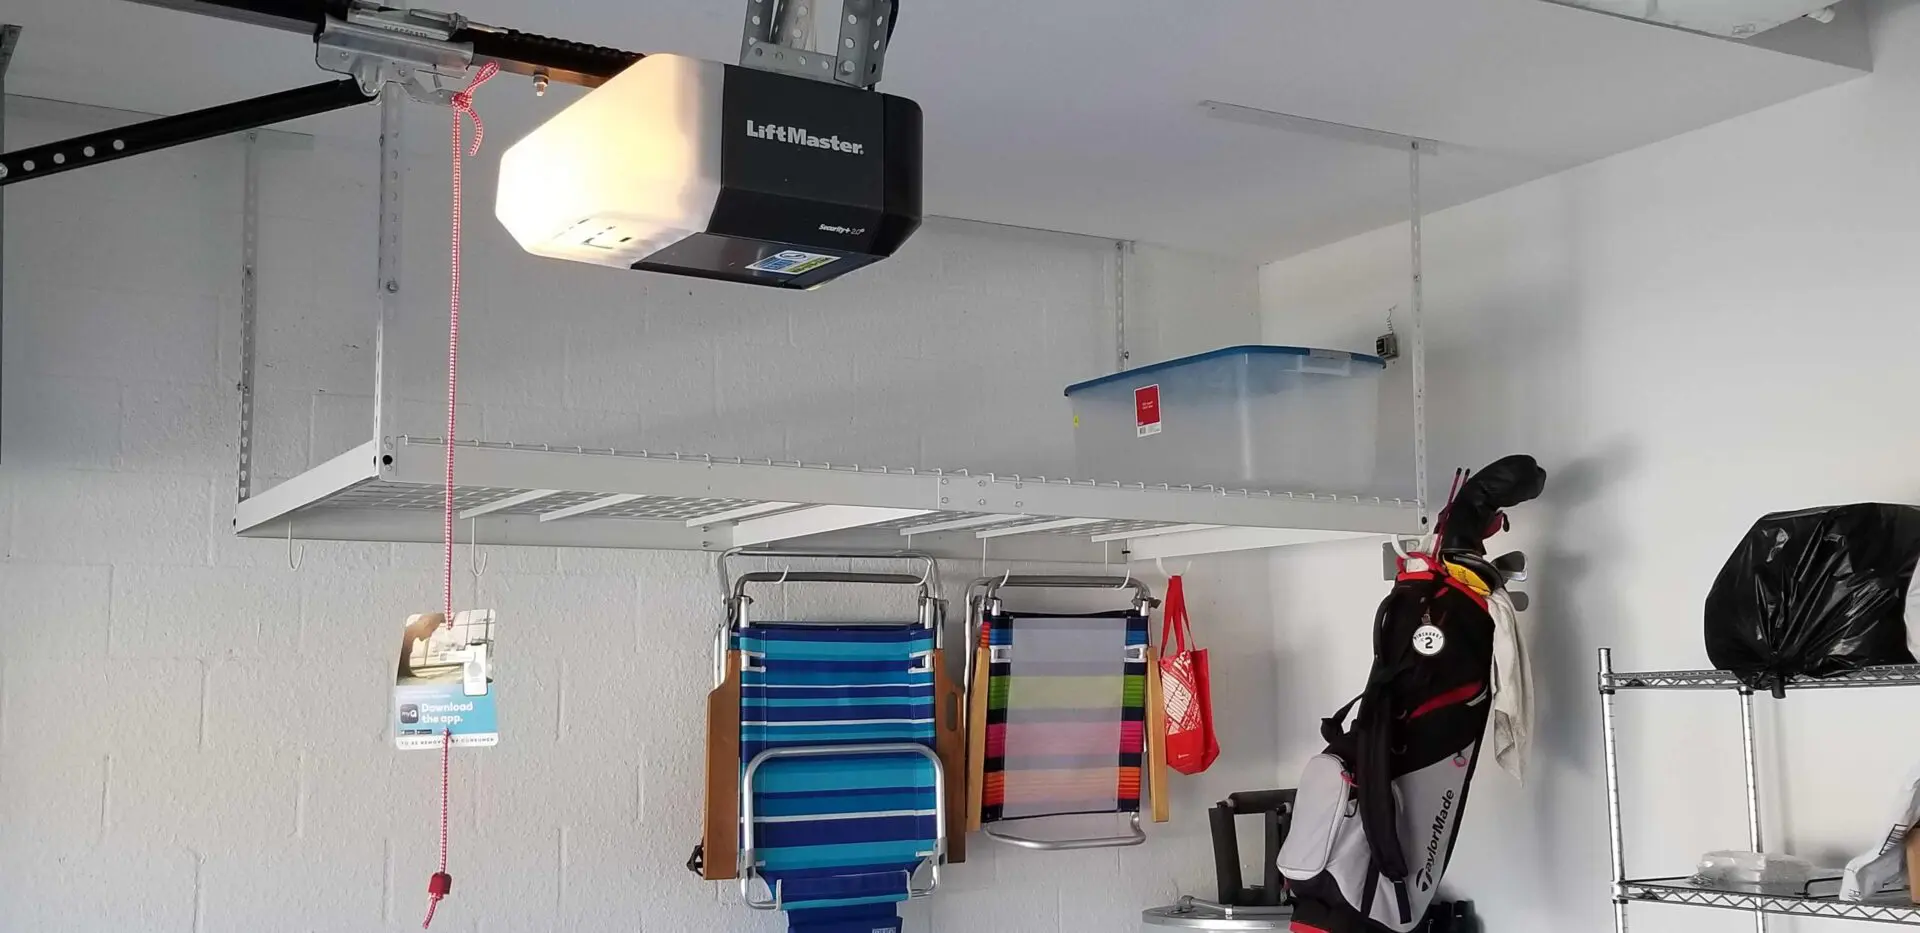 An overhead rack with foldable chairs on its hooks